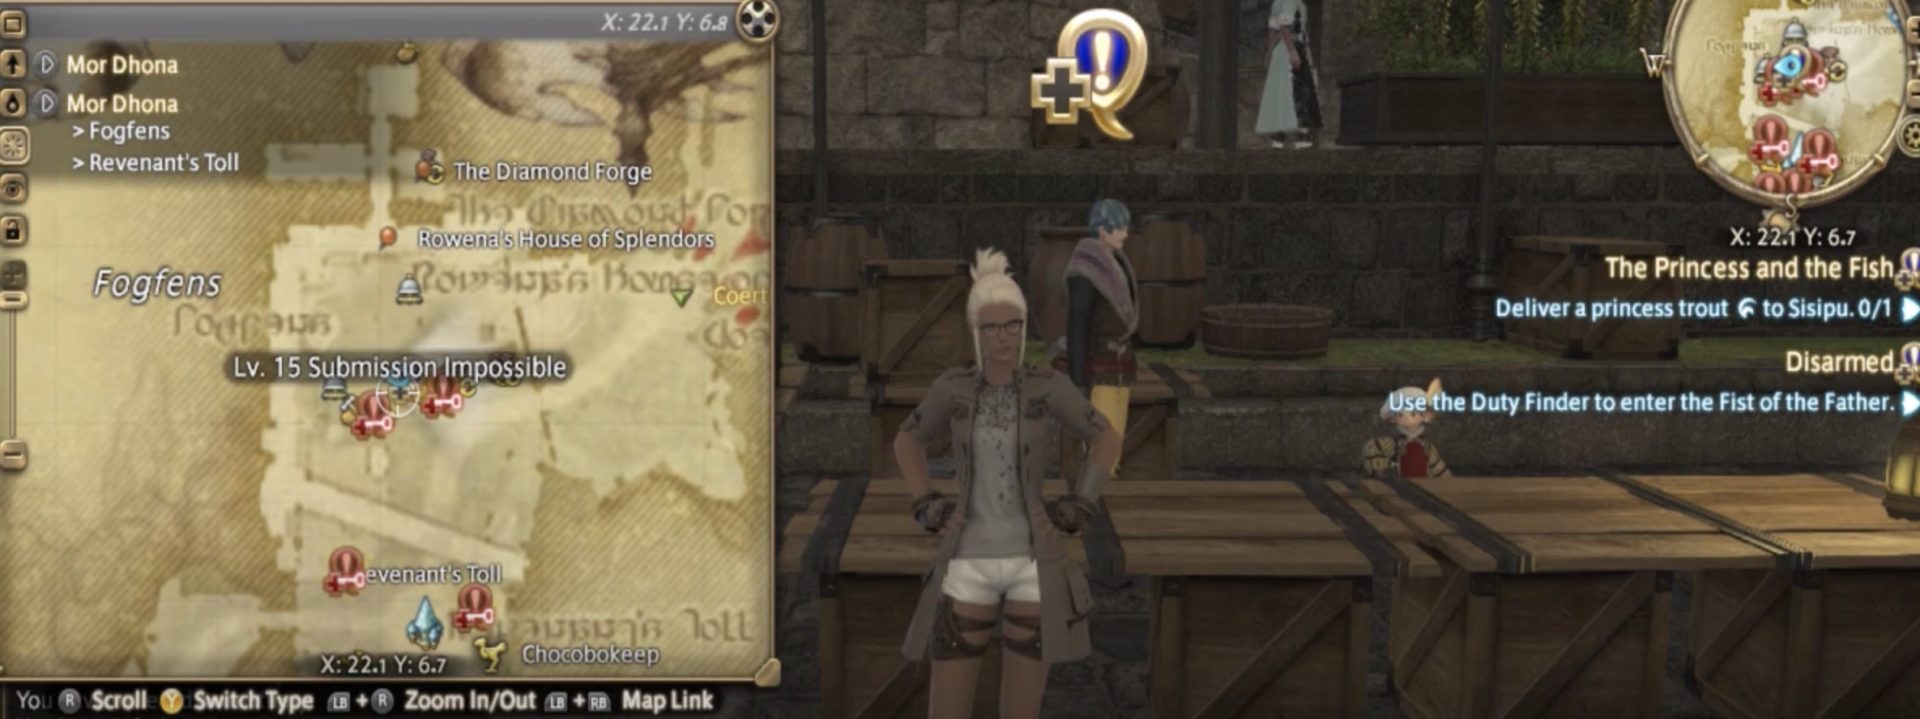 ff14 glamour prism item level requirement